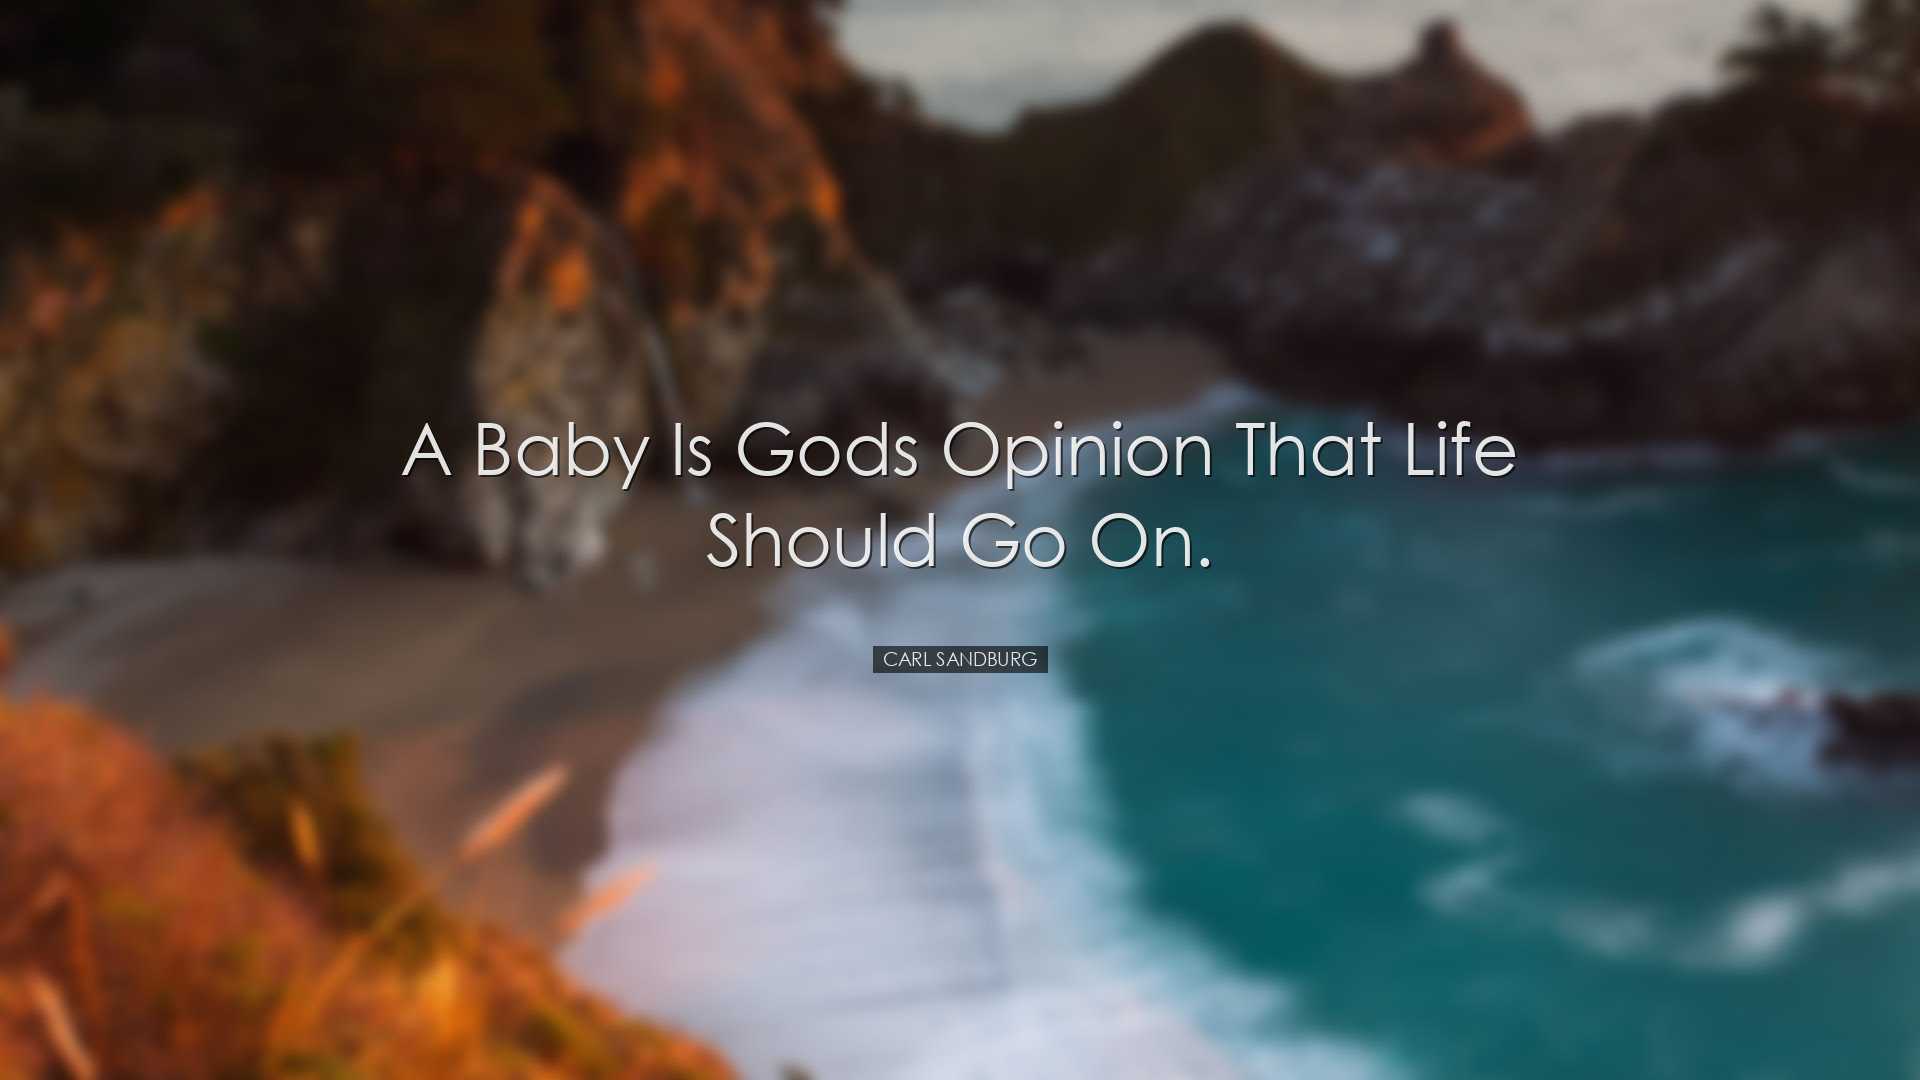 A baby is Gods opinion that life should go on. - Carl Sandburg